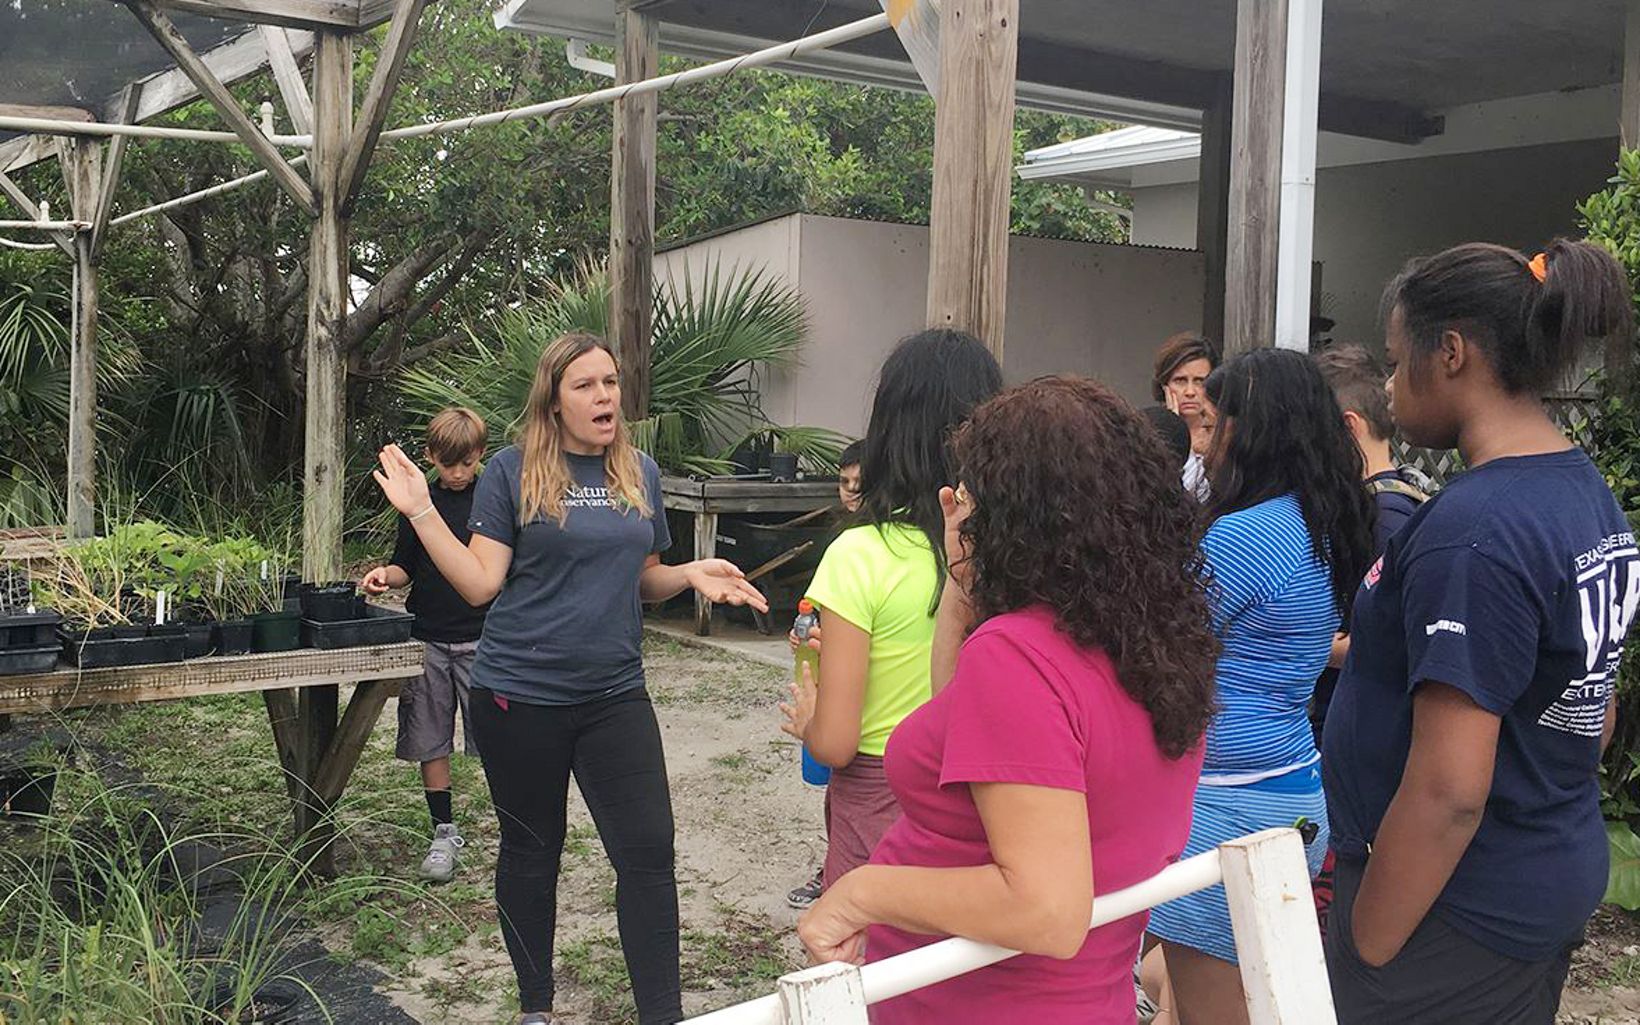 Conservation Education South Florida land conservation manager Sarah Kittredge
teaches middle school students about native plants in the nursery at Blowing Rocks Preserve.  © Rachel Hancock Davis/TNC